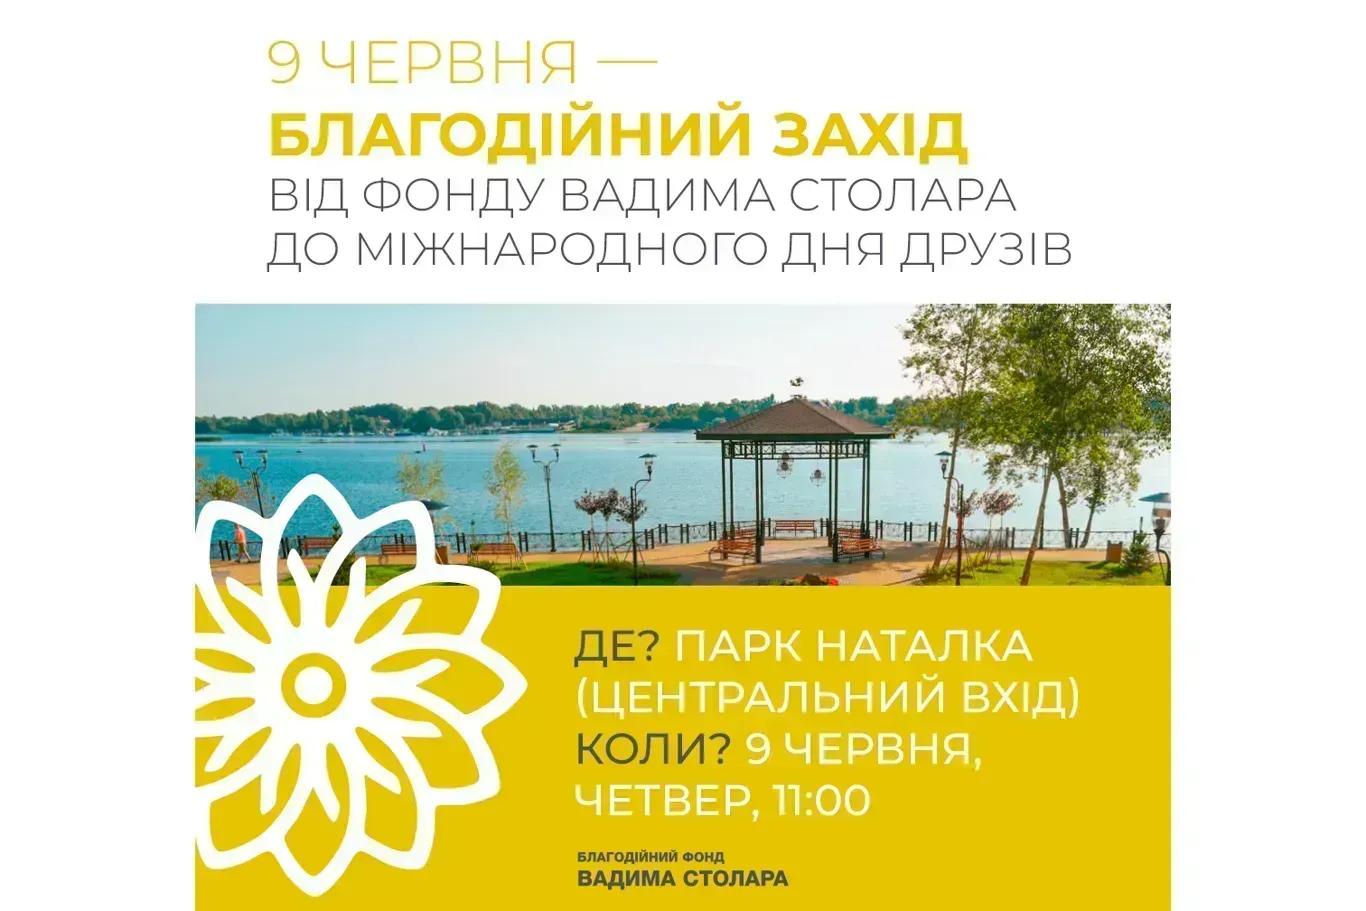 A charity event dedicated to the Friends' Day will take place in Kyiv